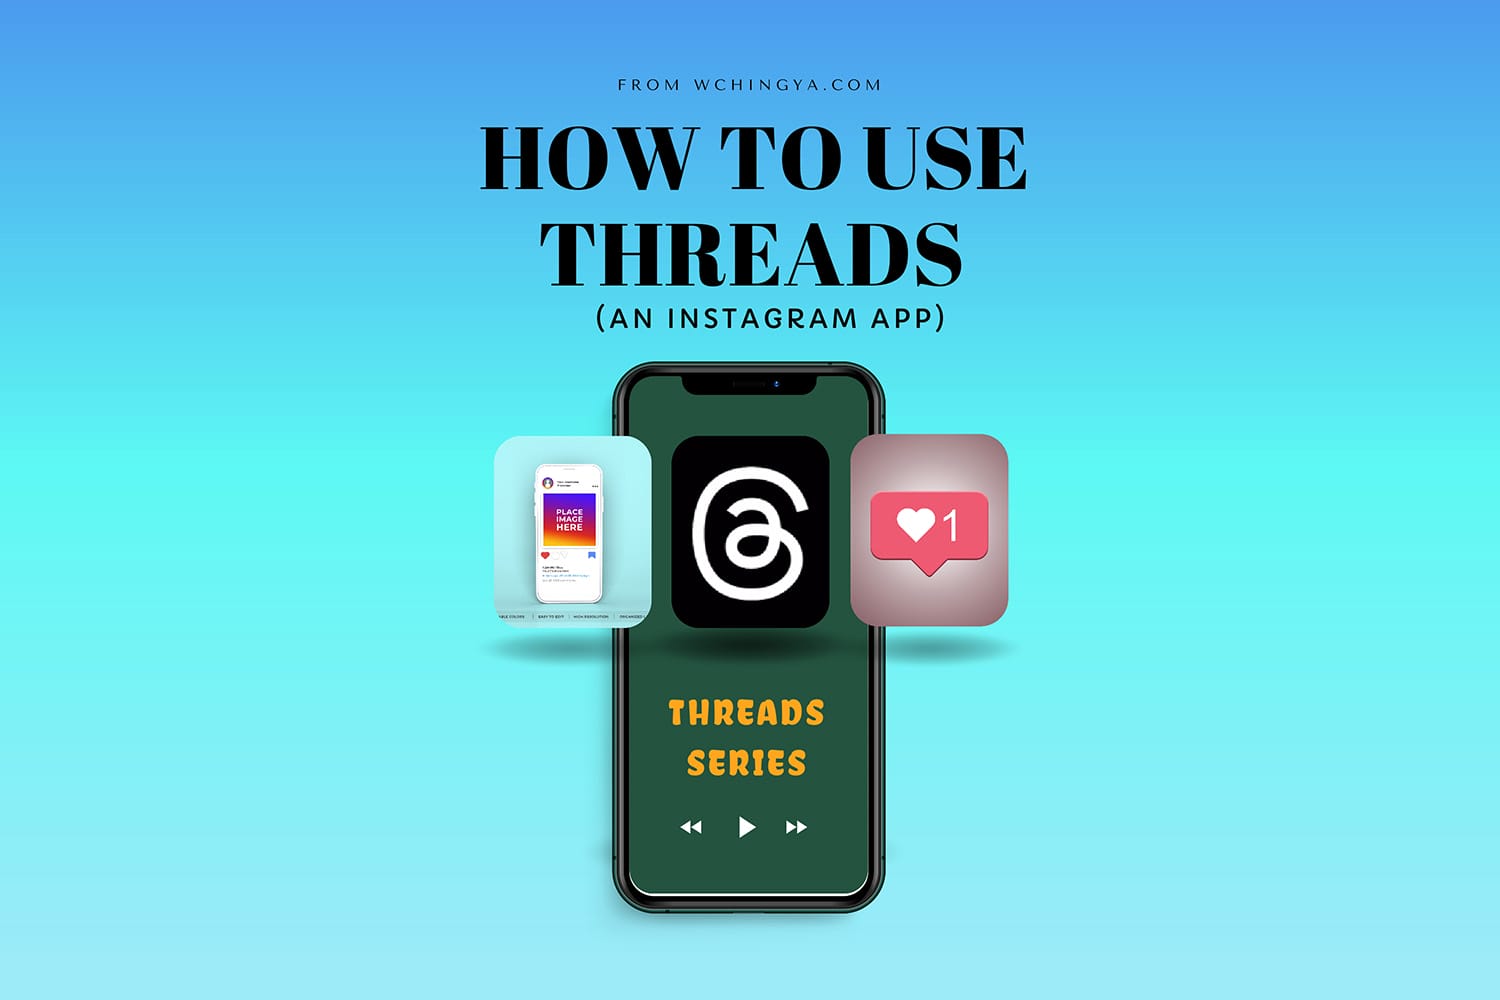 Thread Series - how to use threads and why you should - wchingya